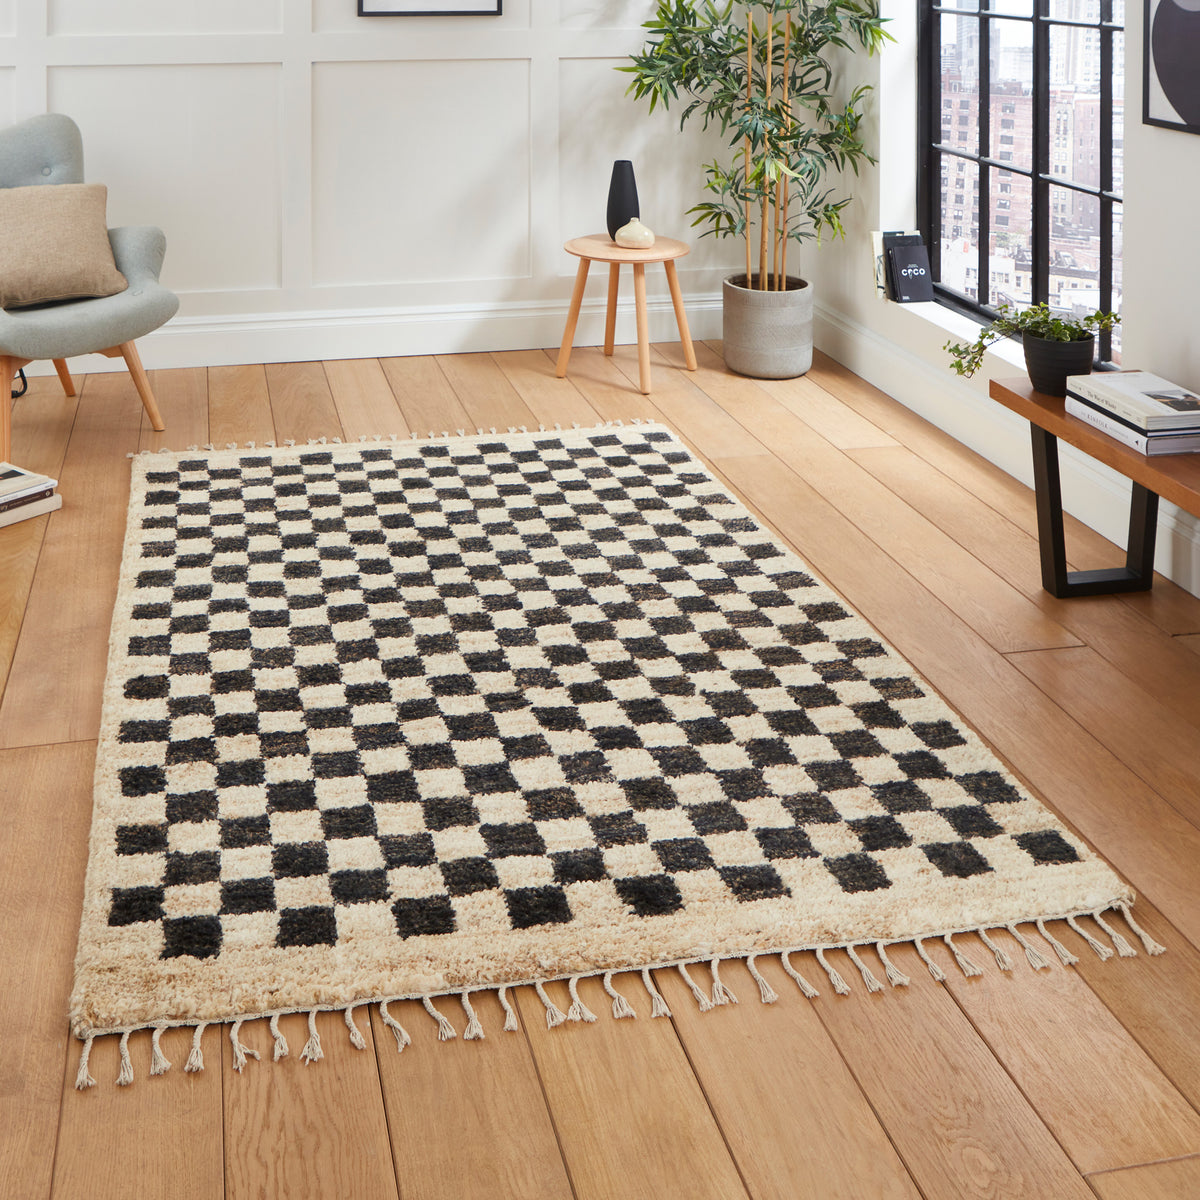 Franklin Natural Hemp Black/Ivory Chequered Rug for living room